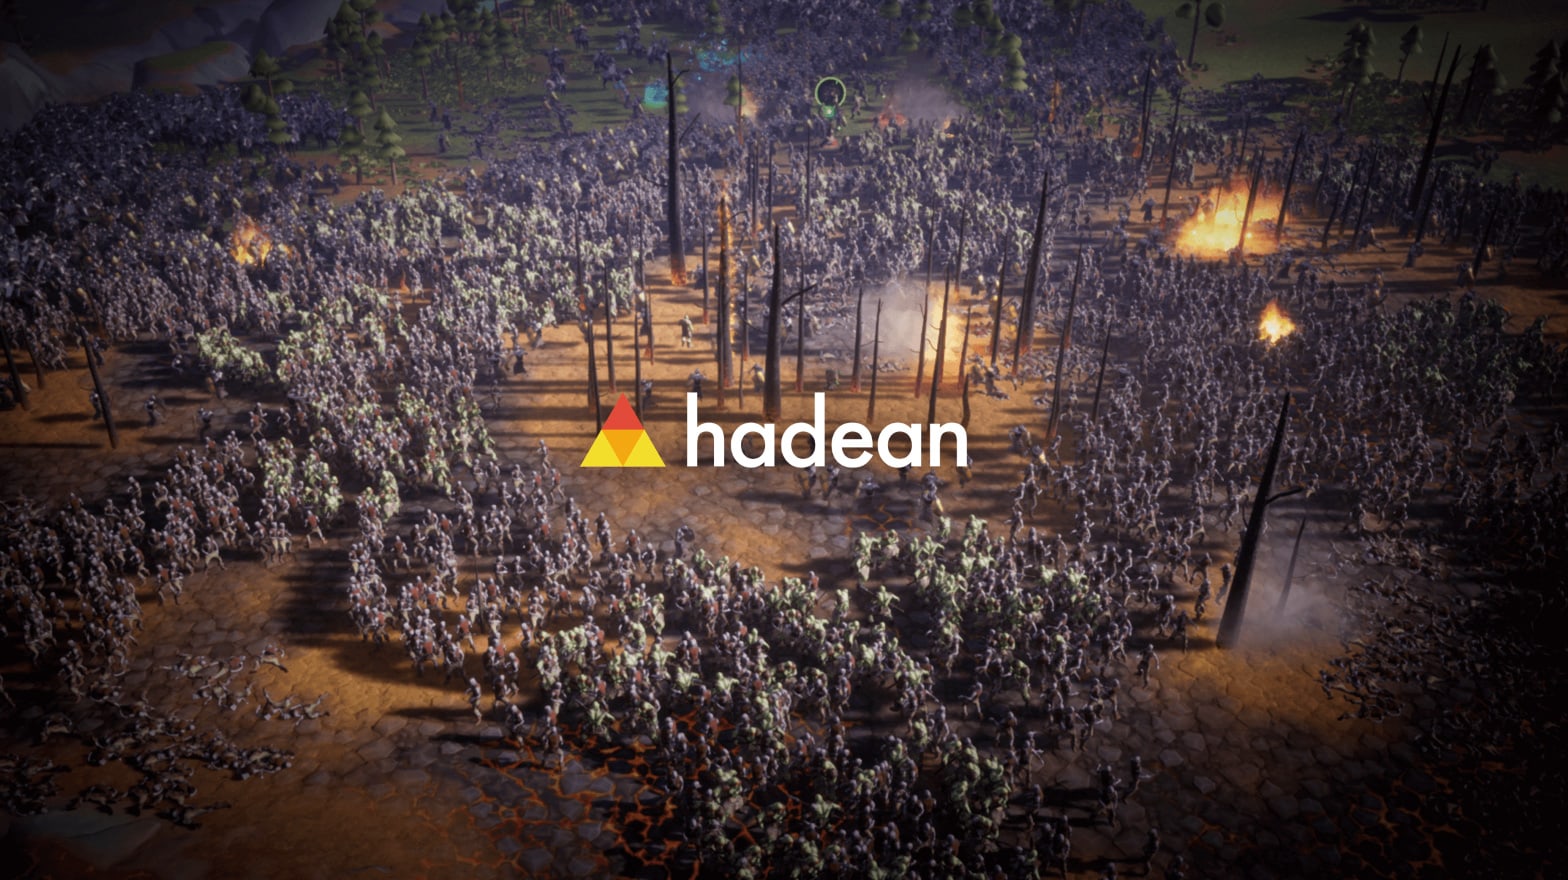 hadean logo on background with a bunch of soldiers on a barren field